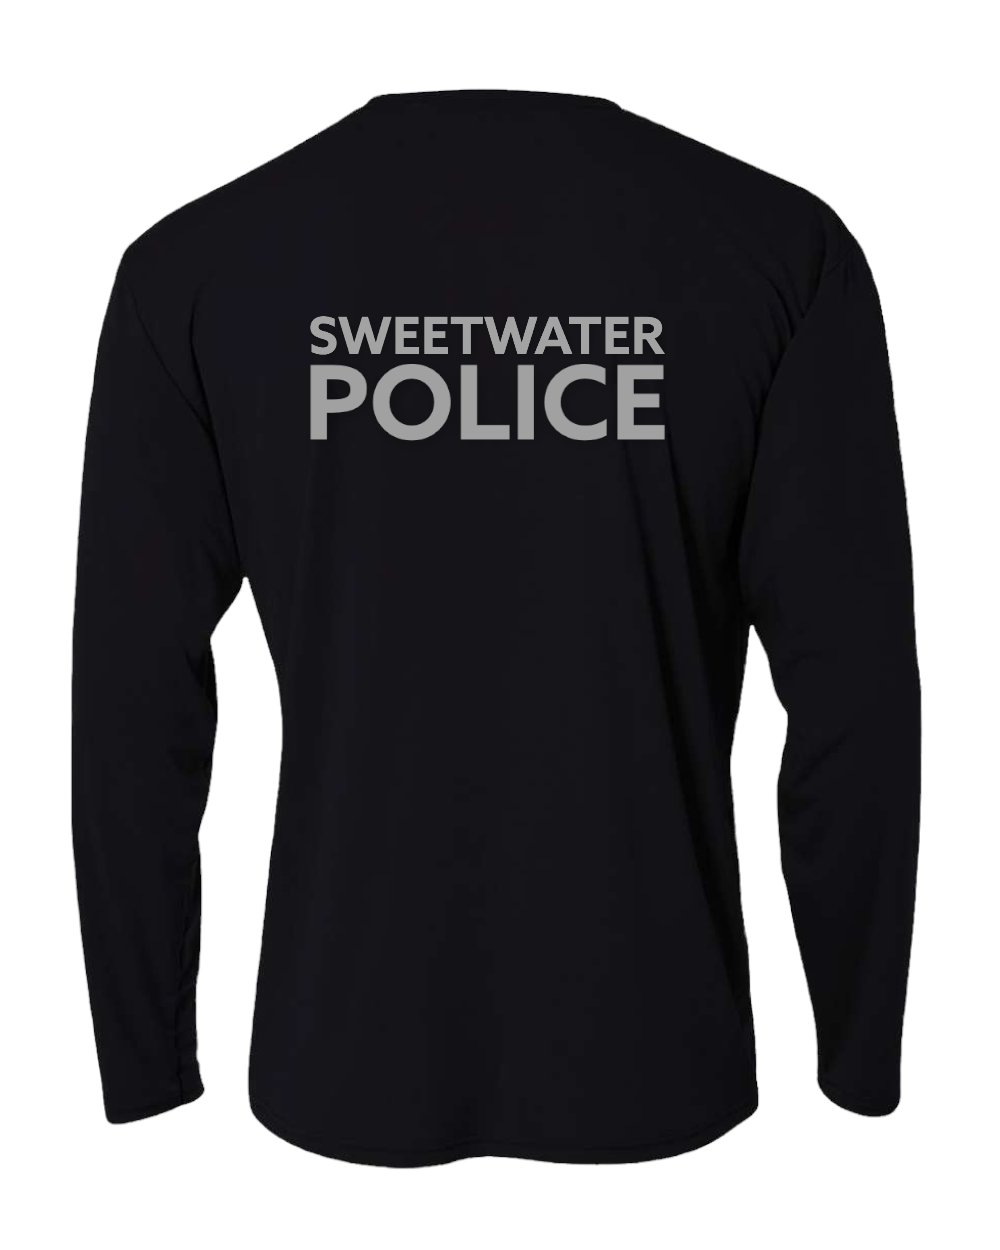 Sweetwater Police Department Cooling Performance Longsleeve